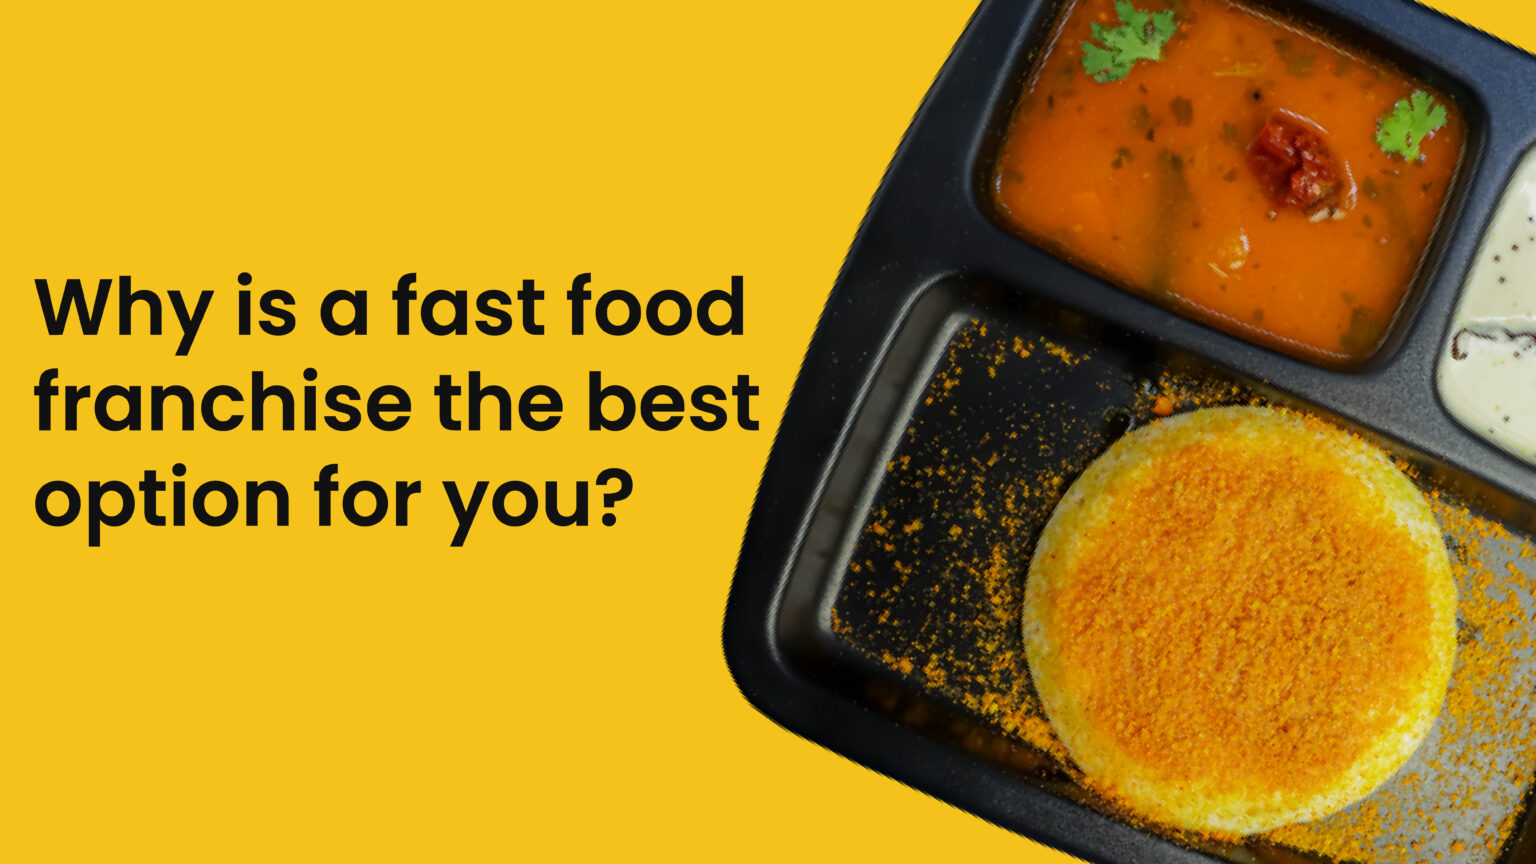 Why is a fast food franchise the best option for you?